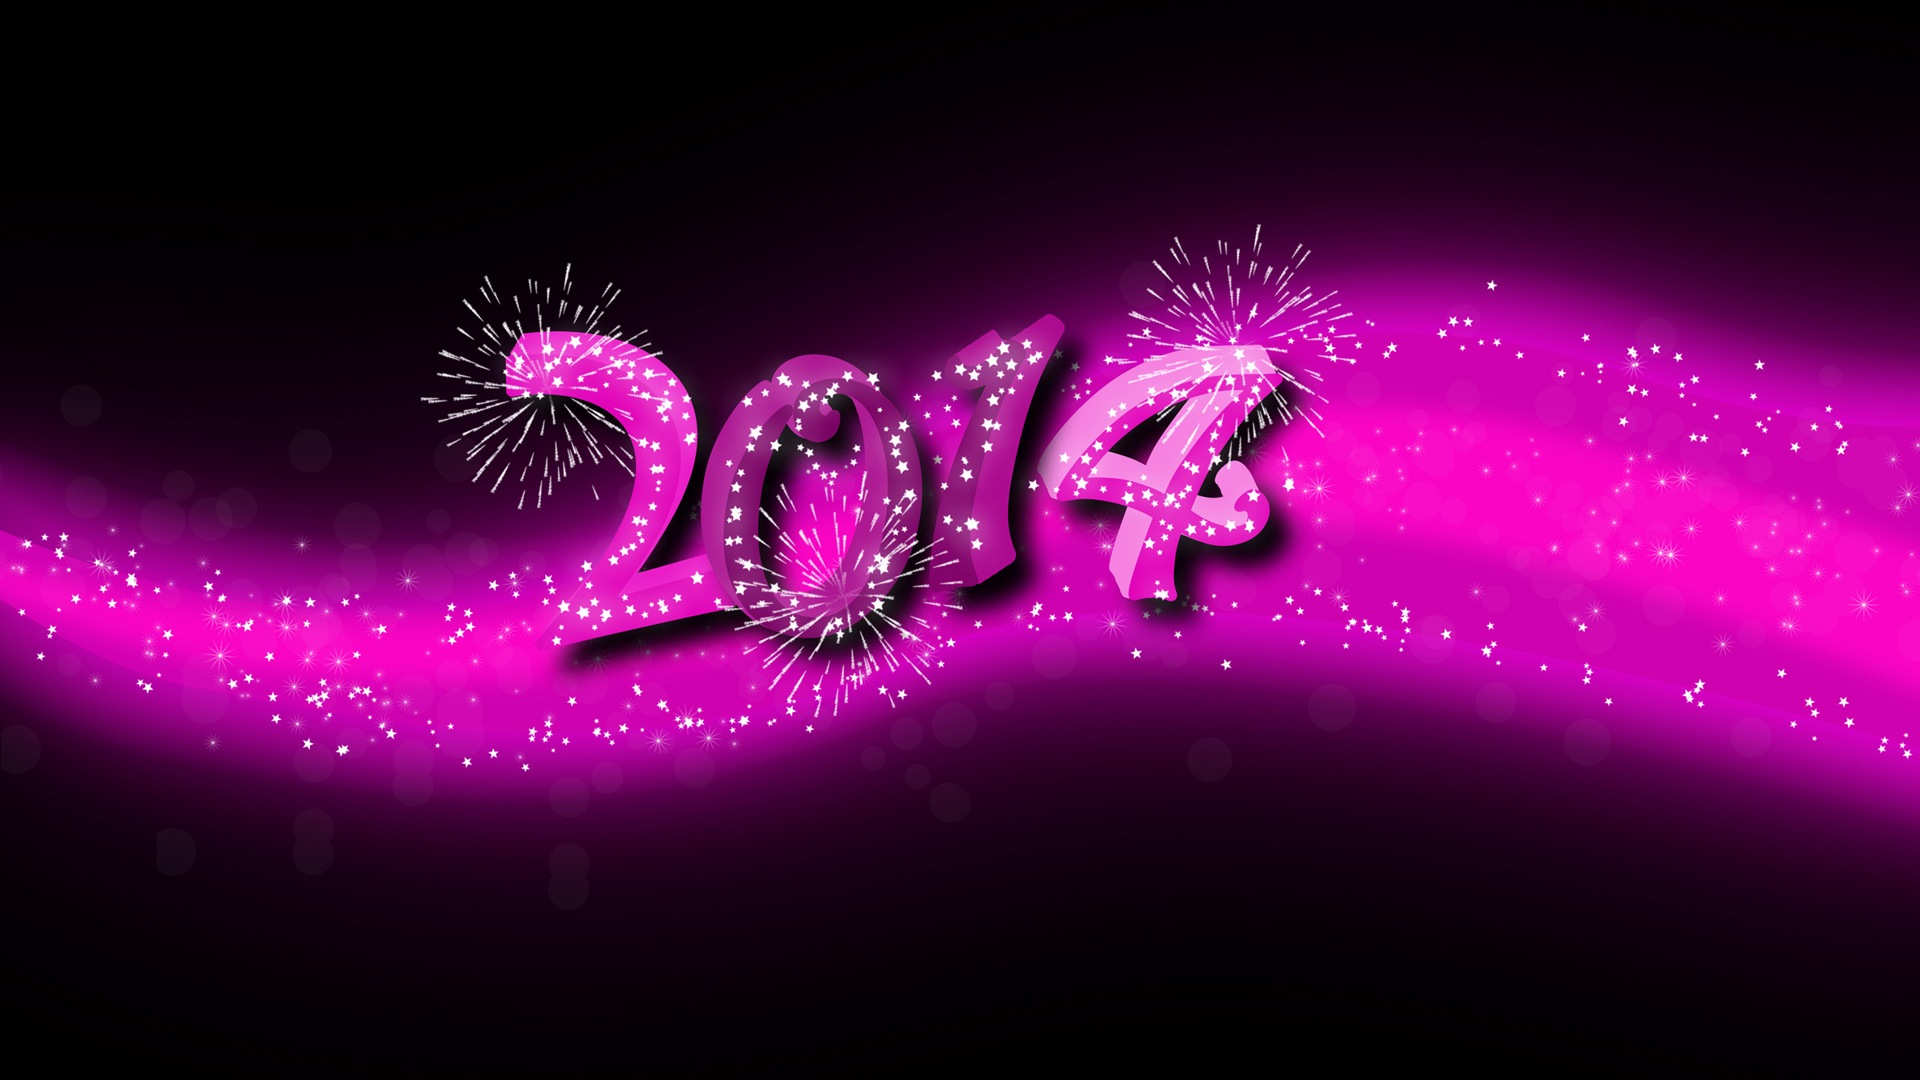 2014 New Year Theme HD Wallpapers (2) #4 - 1920x1080